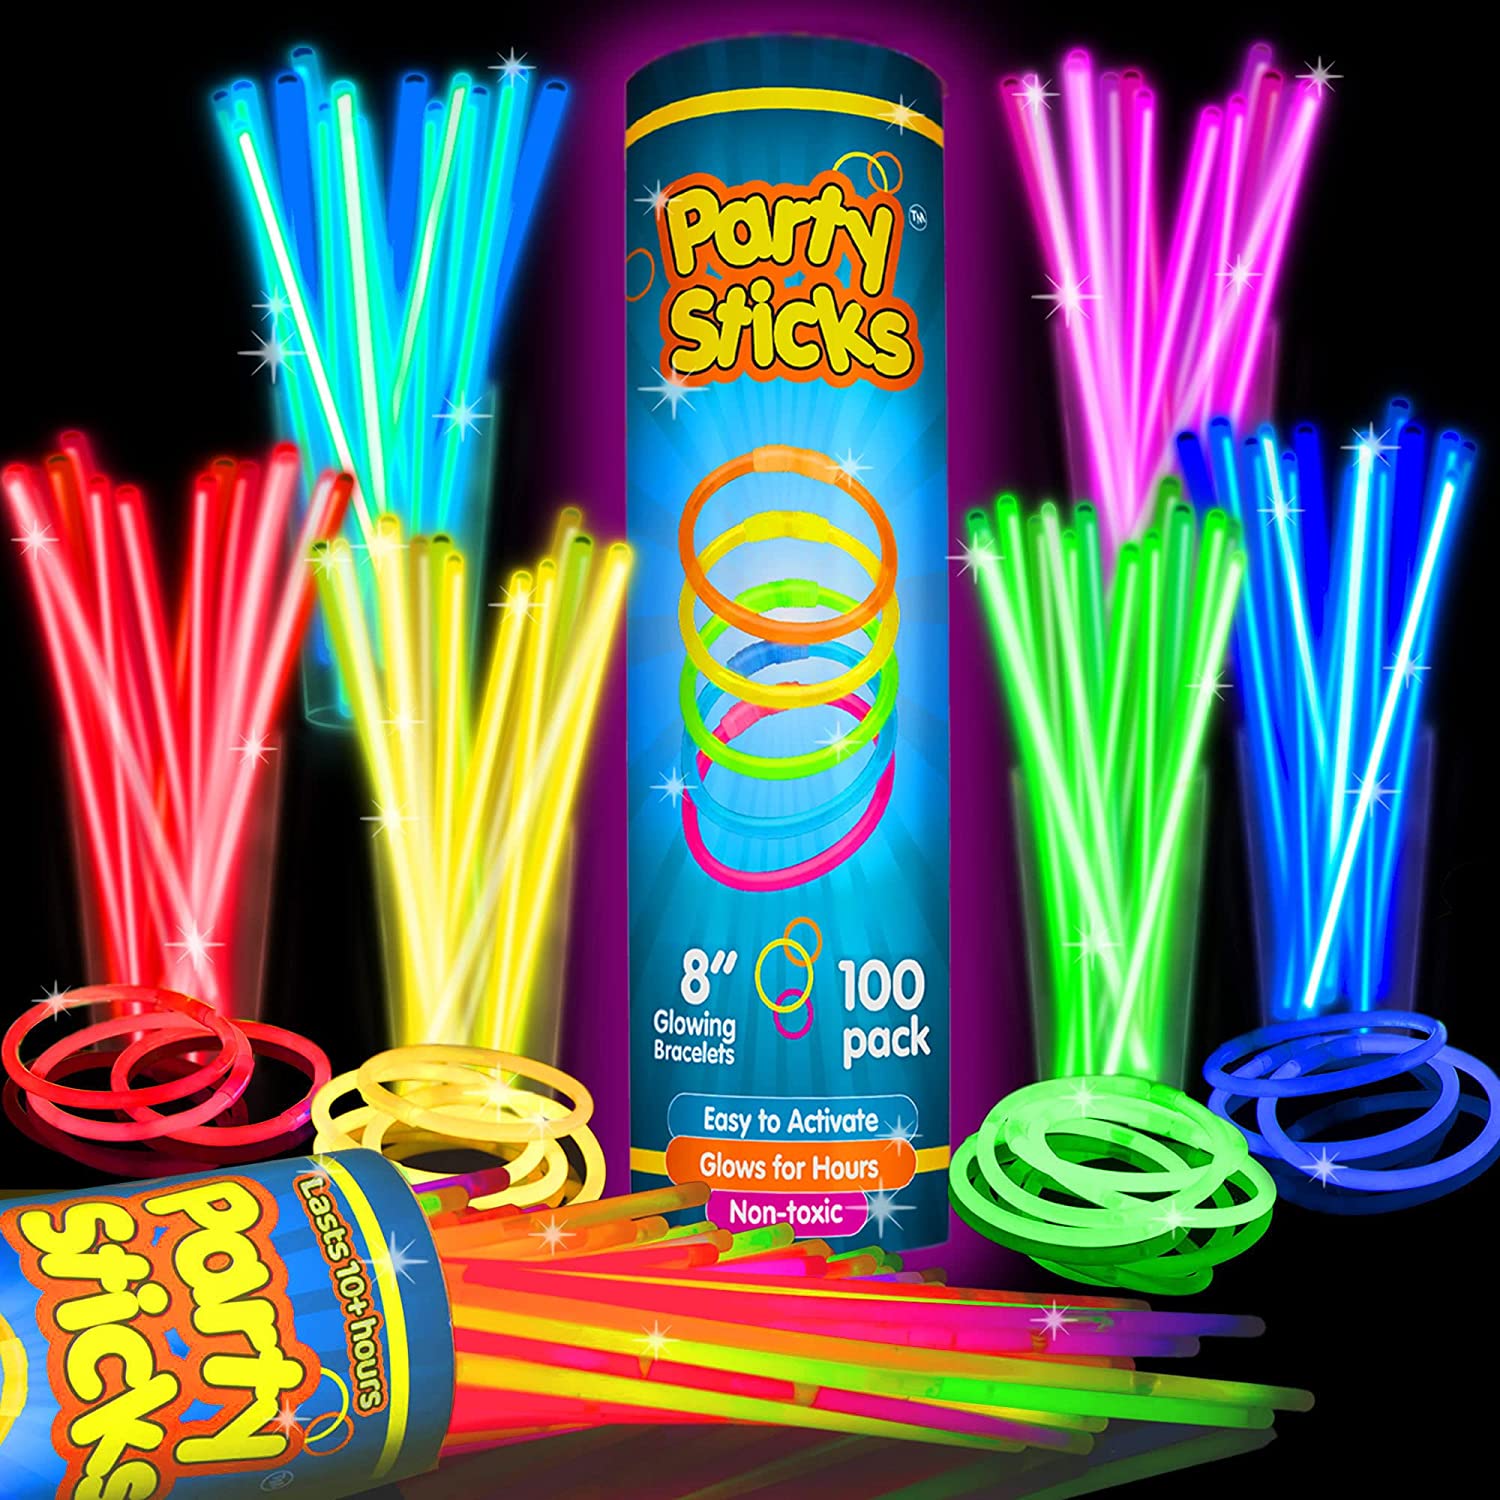 PartySticks Glow Sticks Party Supplies 100pk - 8 Inch Glow in the Dark Light Up Sticks Party Favors, Glow Party Decorations, Neon Party Glow Necklaces and Glow Bracelets with Connectors - image 2 of 7